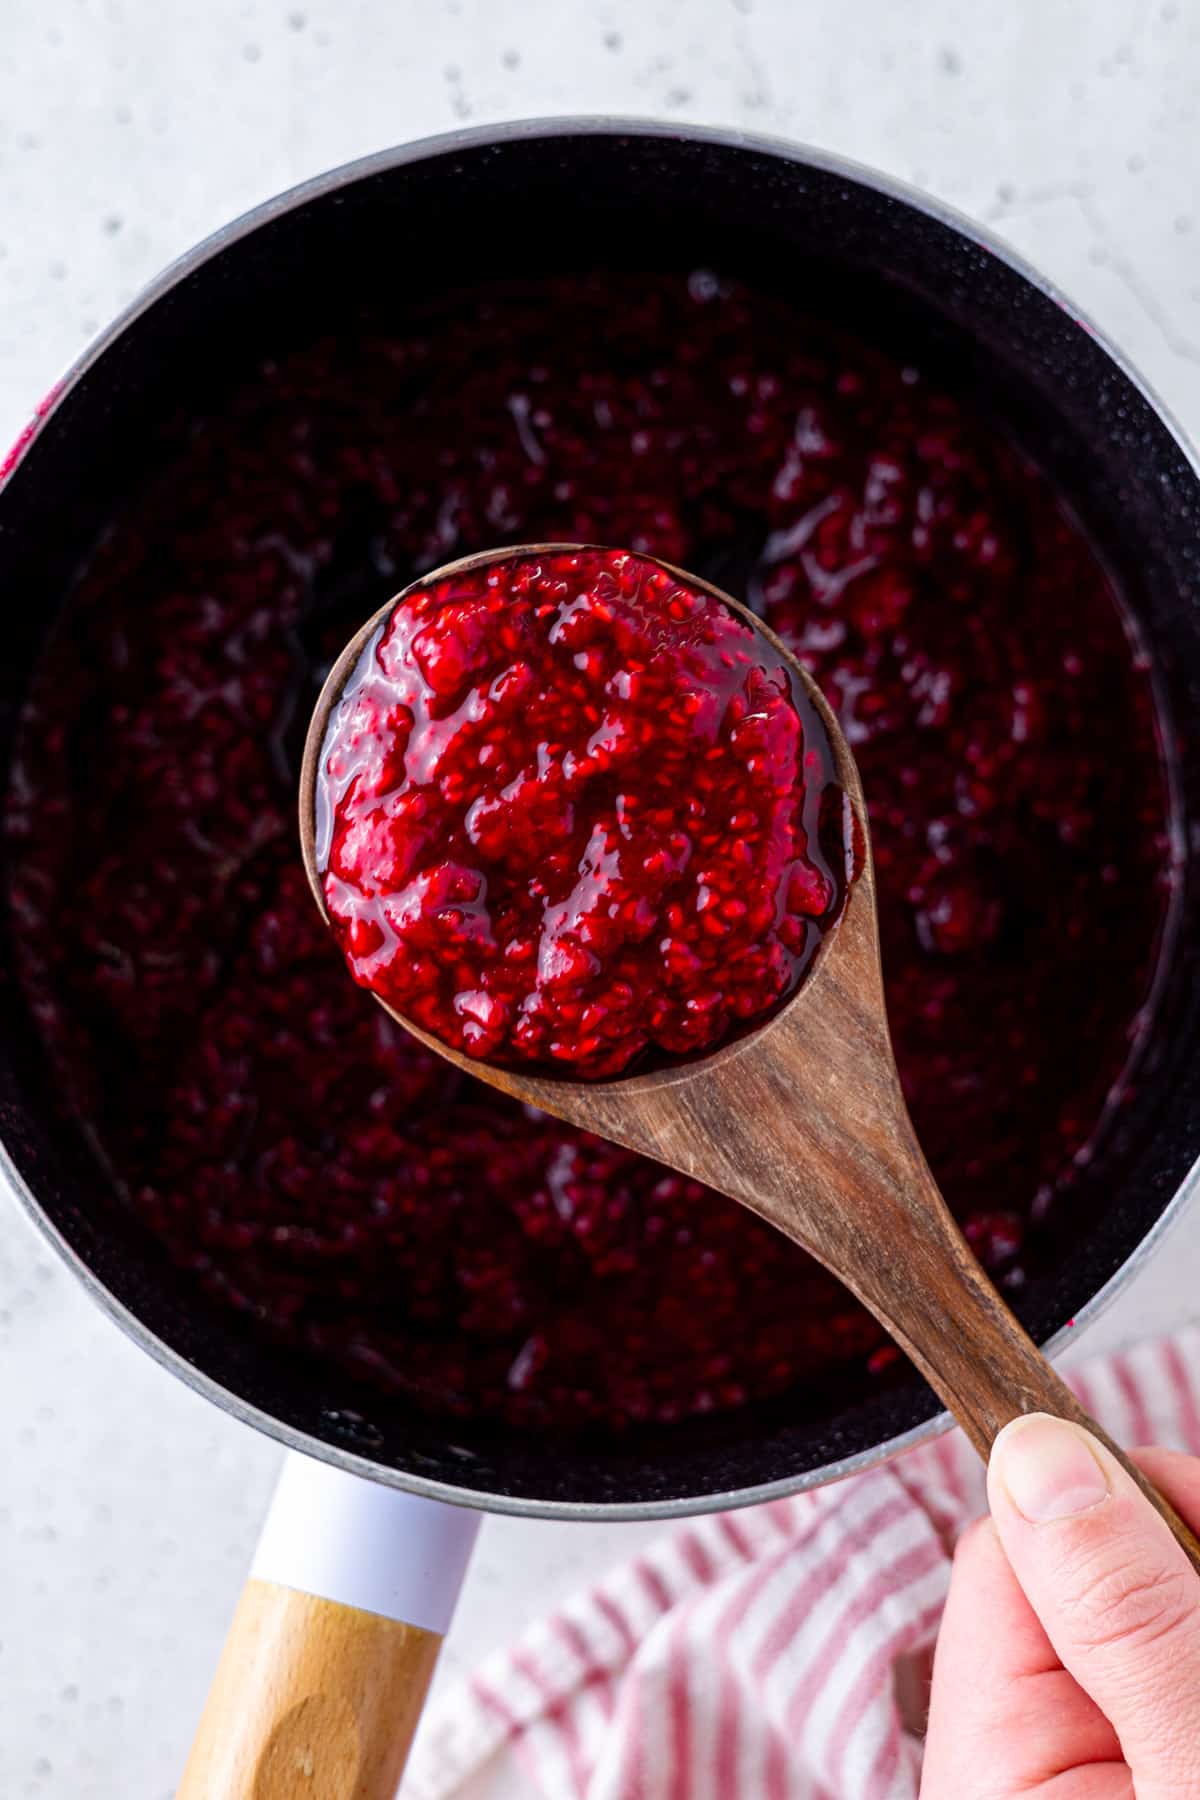 A saucepan and wooden spoon filled with compote.